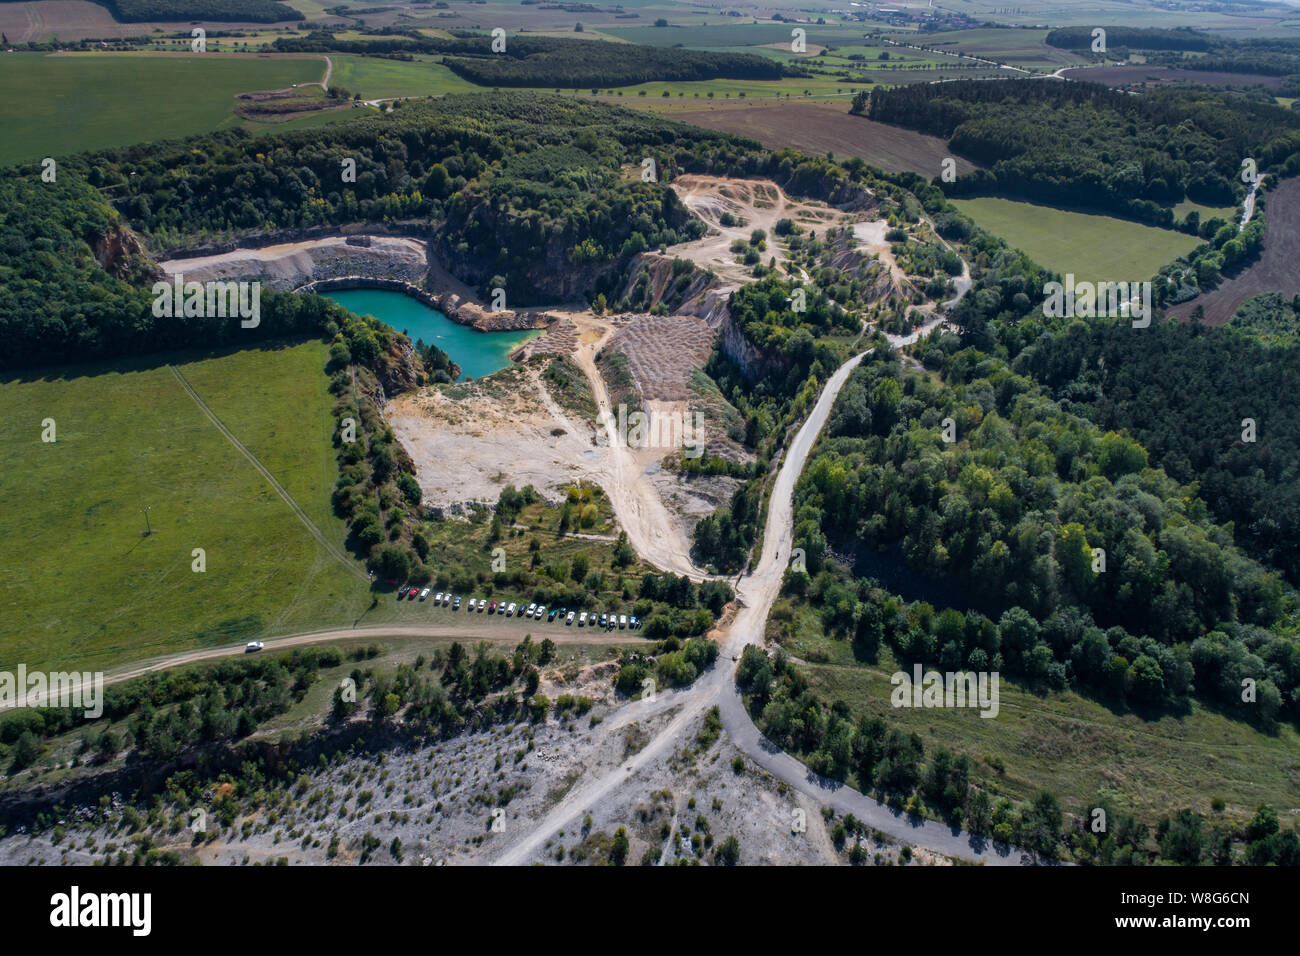 The quarry was opened in 1918 and over the course of the 20th century it gradually expanded its area by merging with the surrounding smaller quarries. Stock Photo